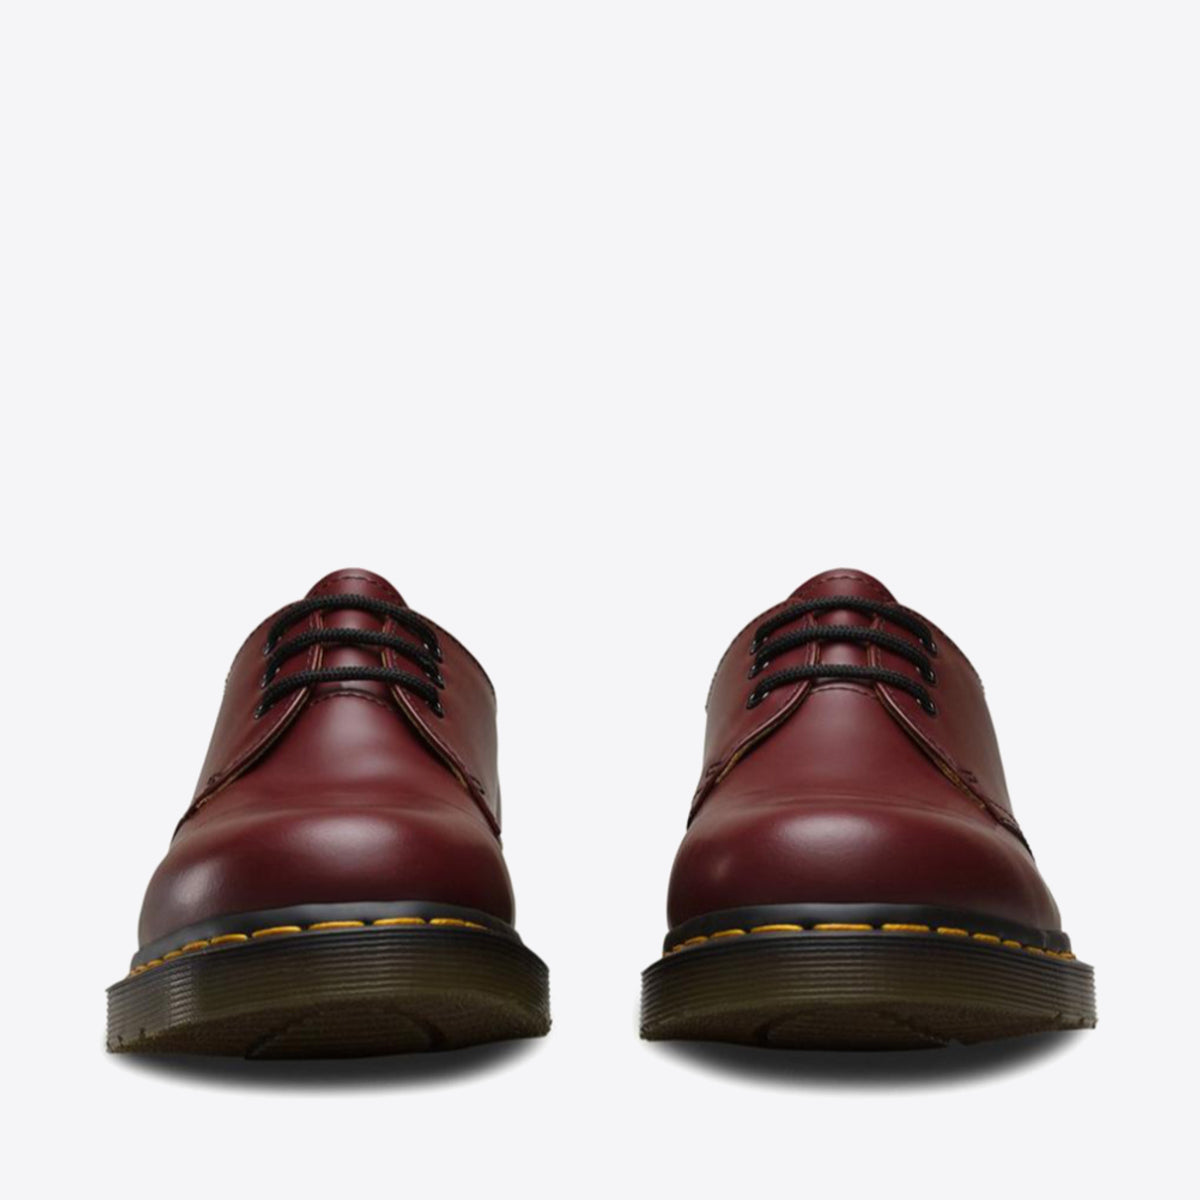 DR MARTENS 1461 Smooth 3 Eye Shoe Cherry Red - Image 5